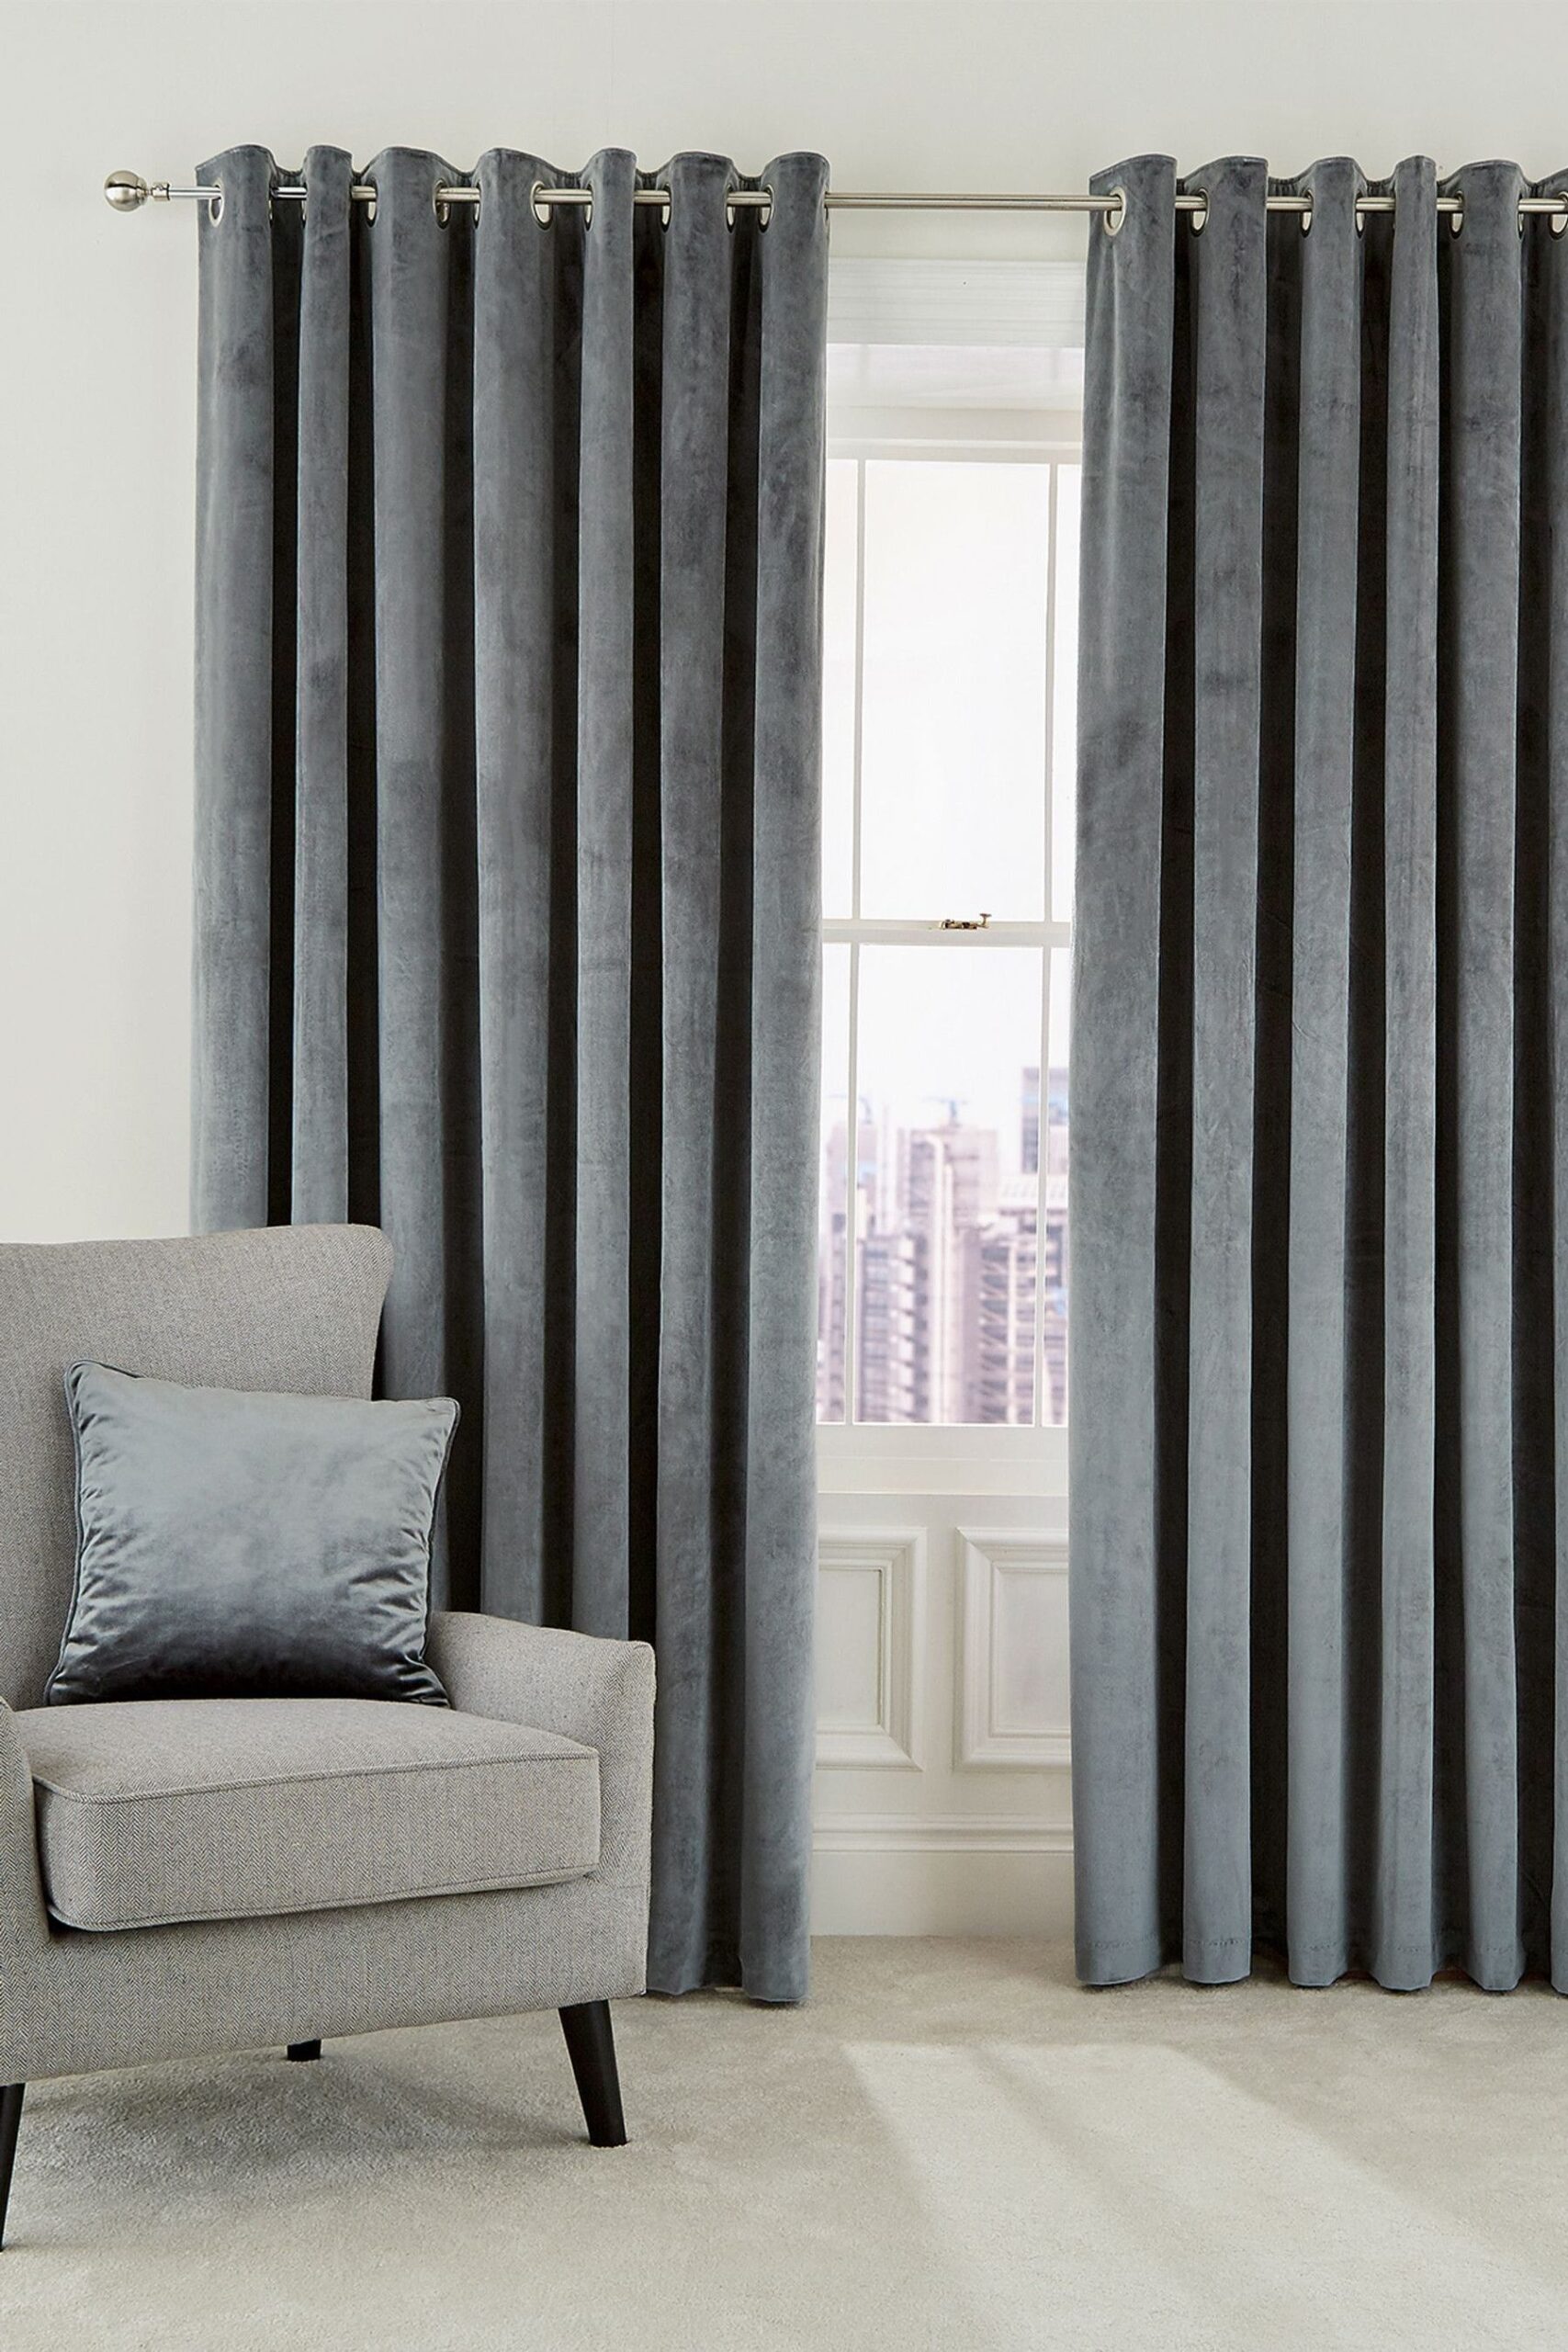 Grey Curtains: Add Sophistication to Your Home with Chic Grey Curtains